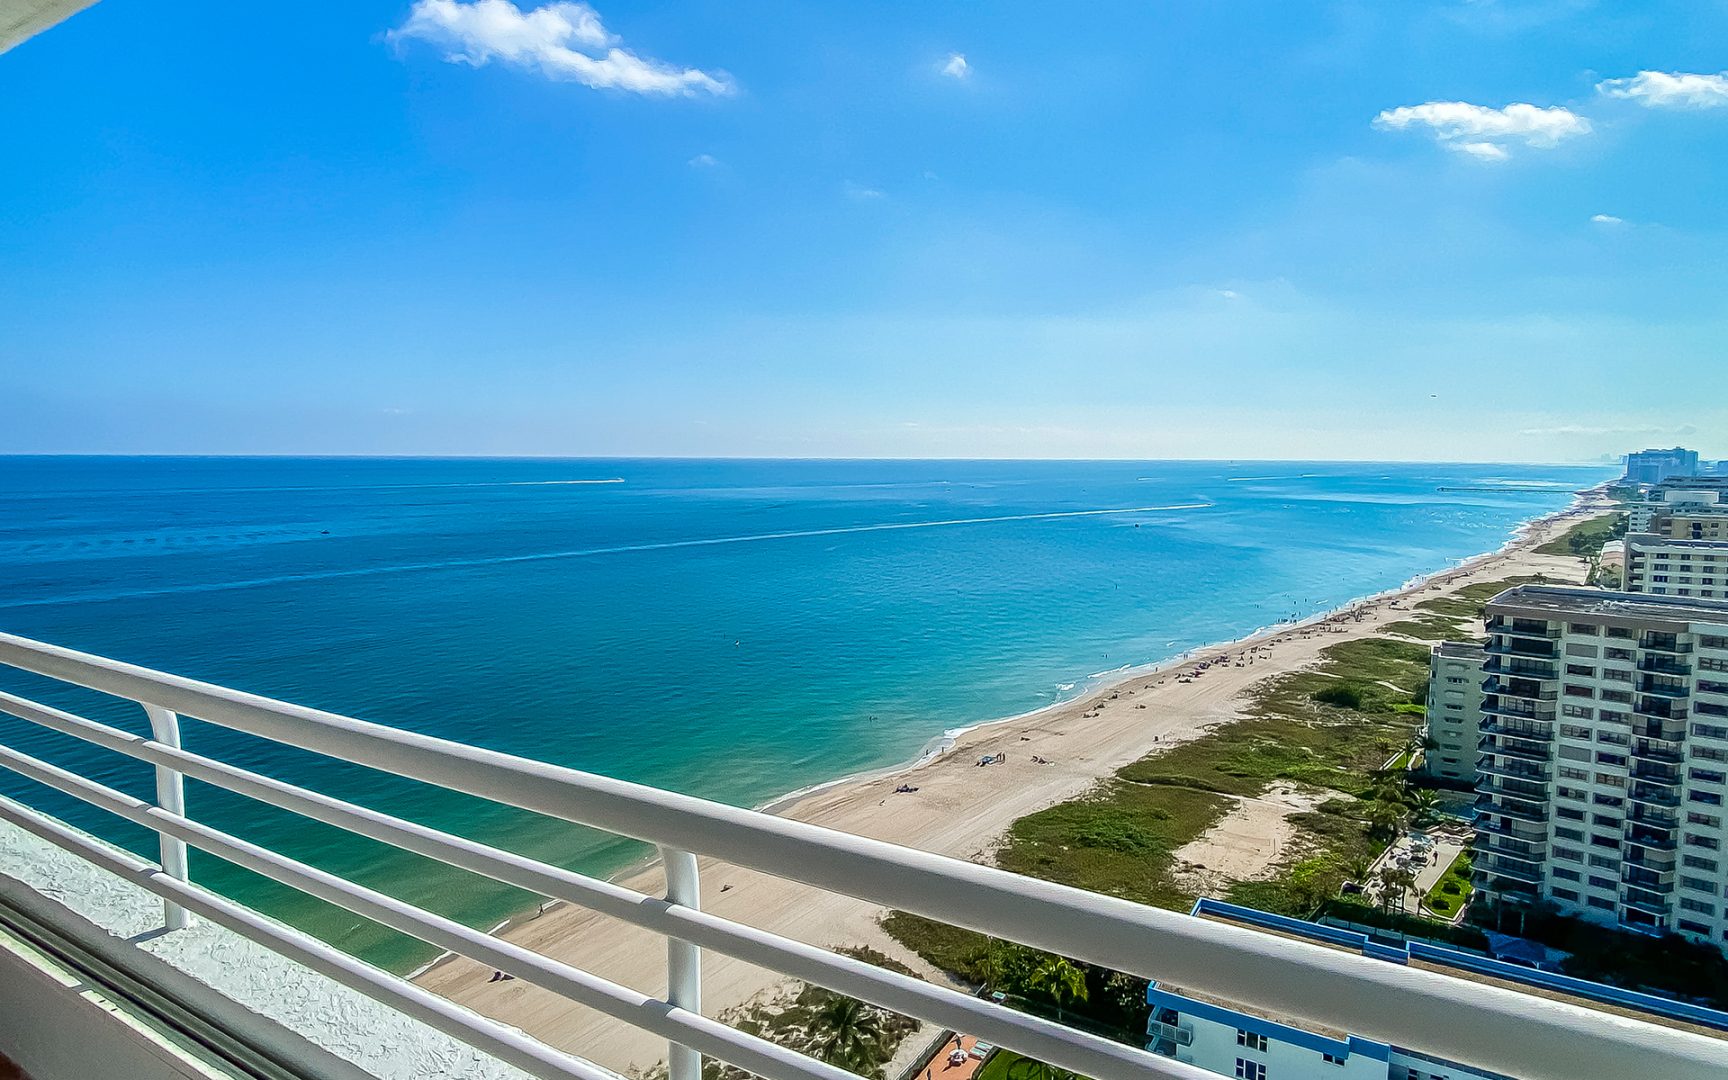 Residence PH at Cristelle 1700 S Ocean Blvd. Lauderdale By The Sea, Florida 33062